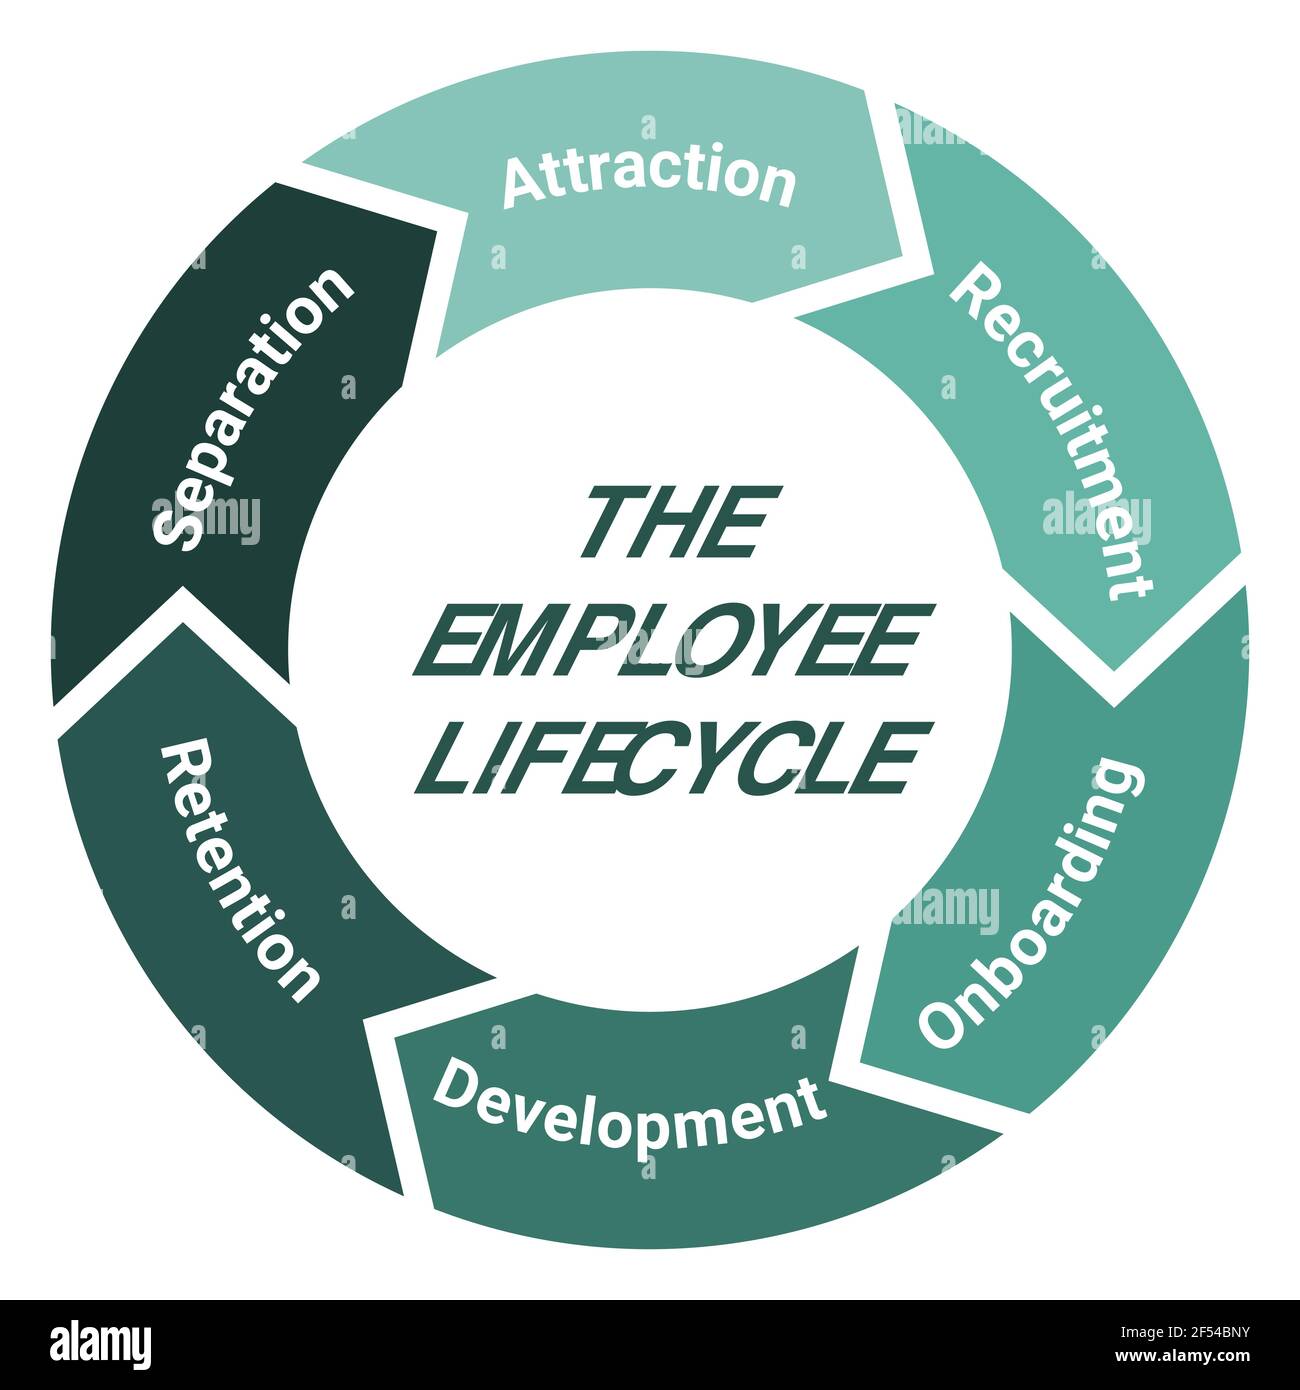 The employee lifecycle management scheme. Methodology circle diagram with attraction, recruitment, onboarding, development, retention and separation. Stock Vector